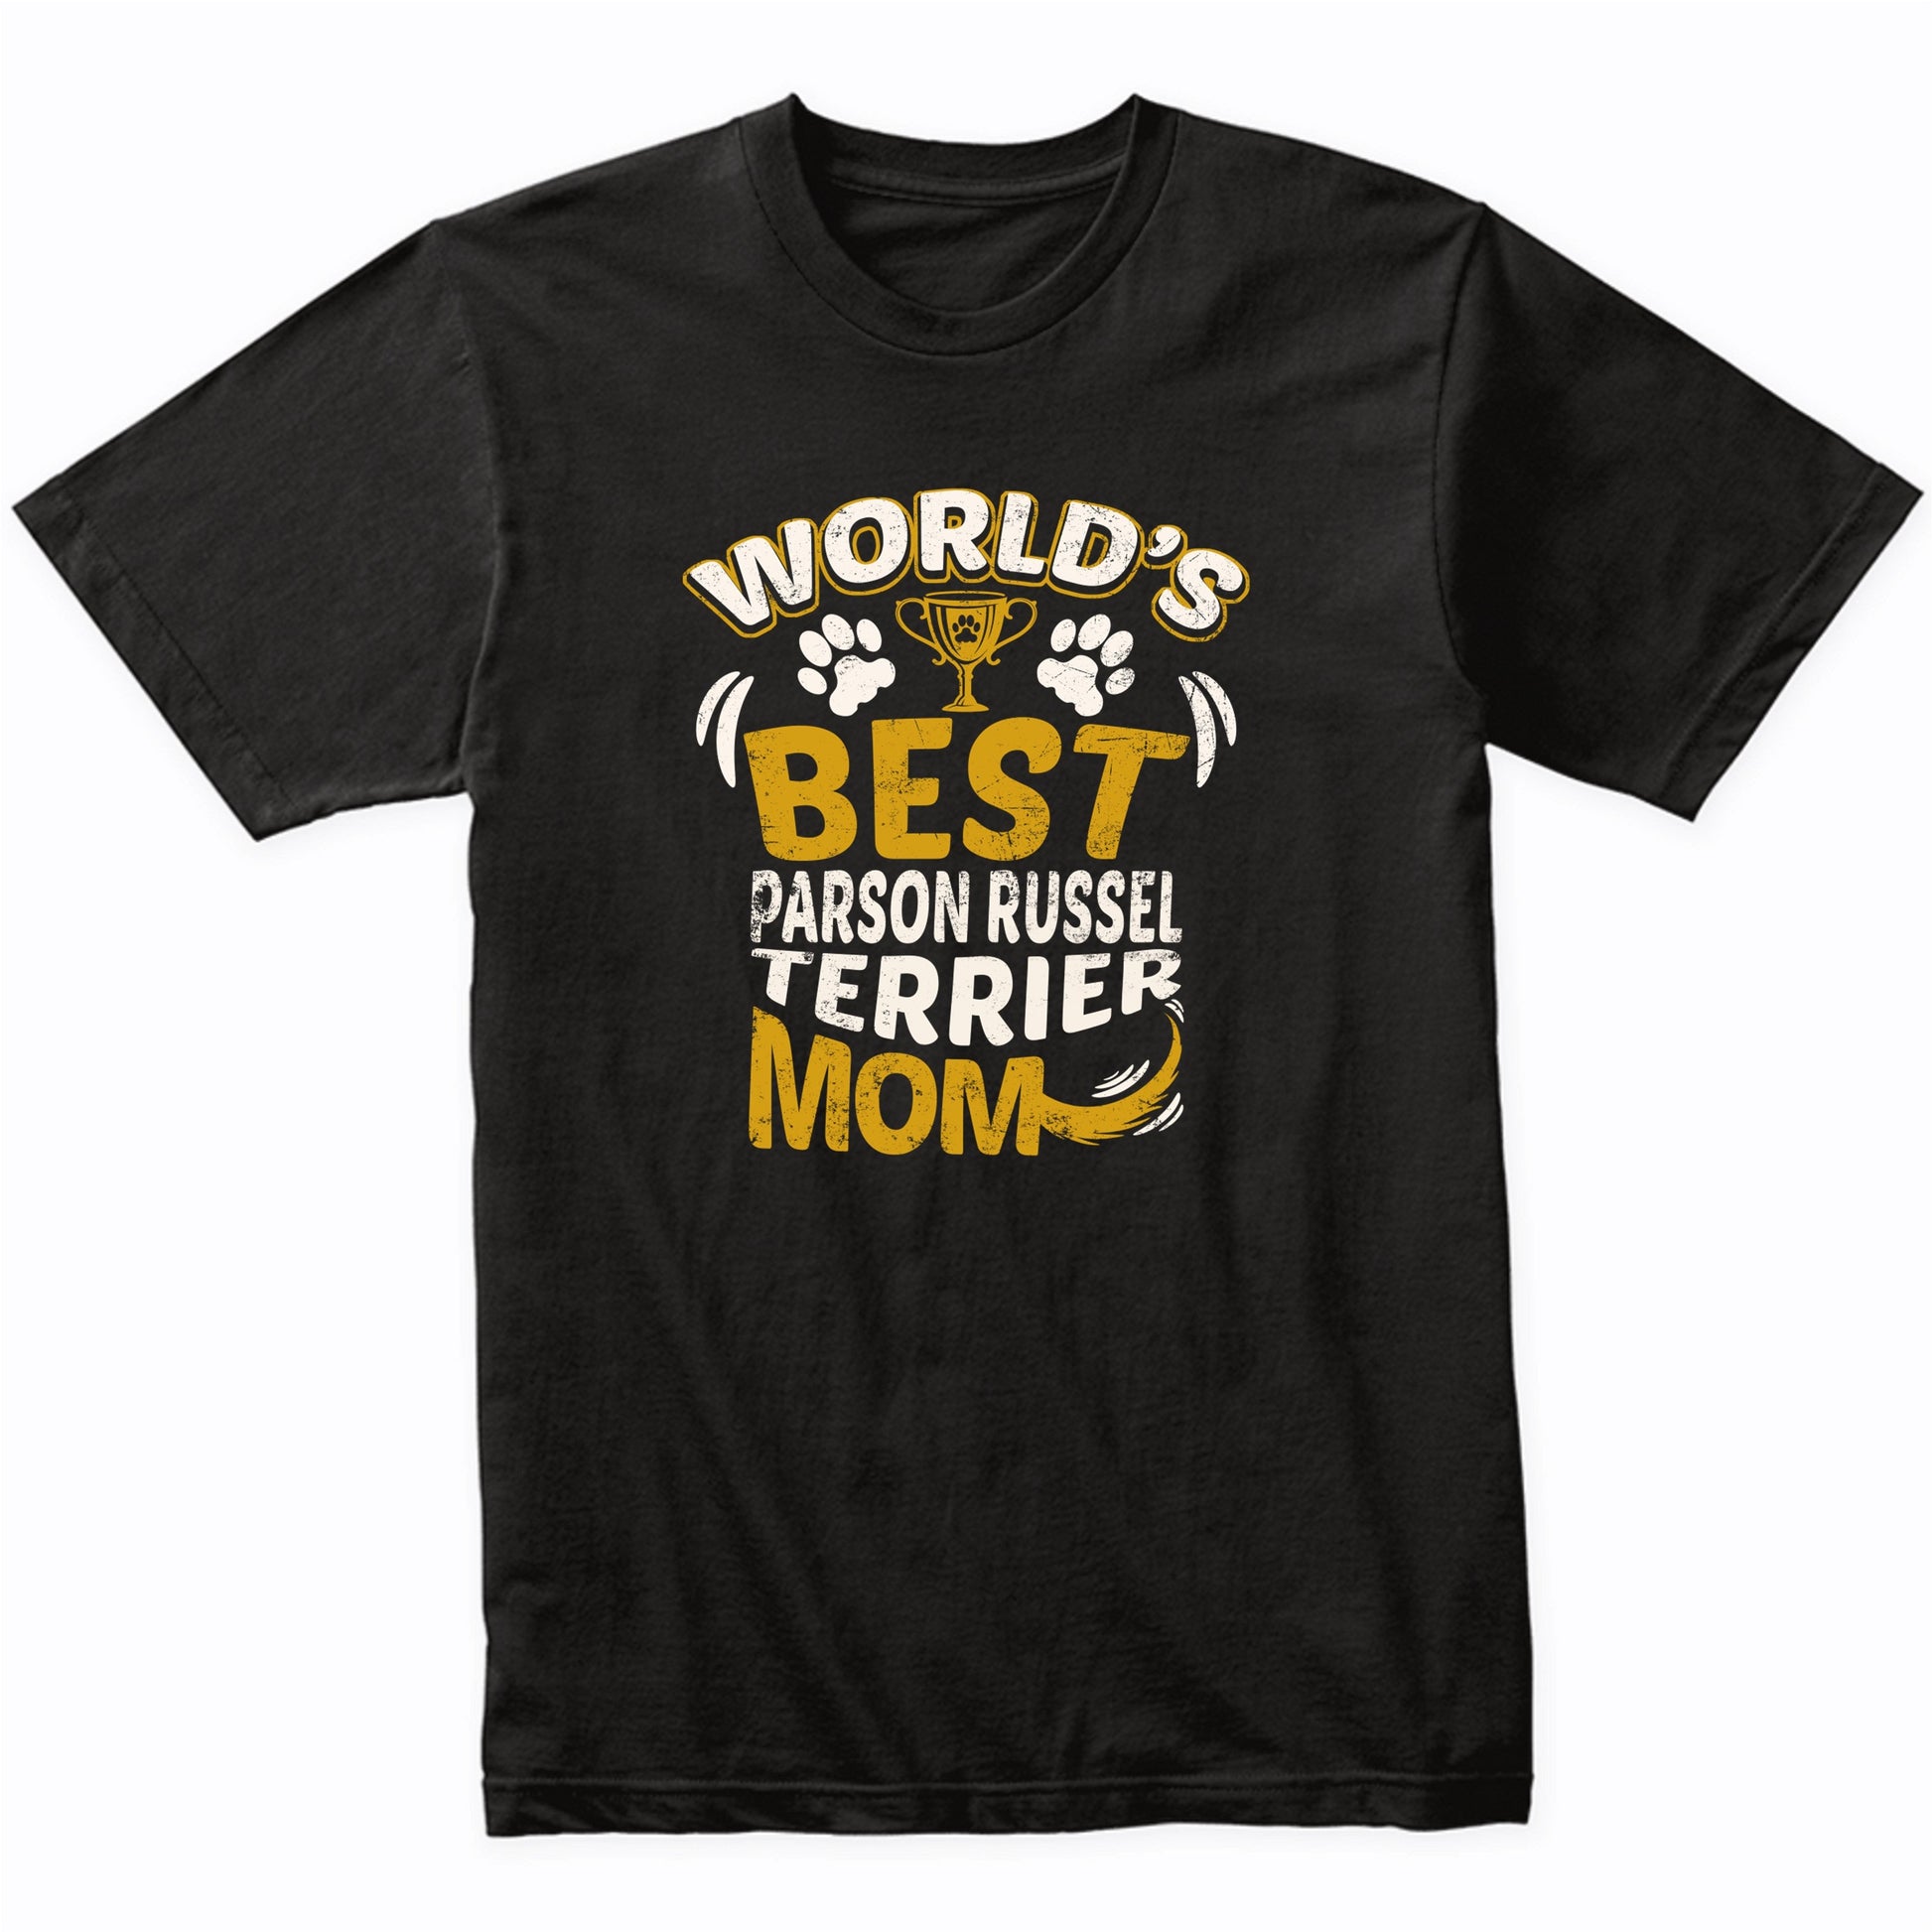 World's Best Parson Russell Terrier Mom Graphic T-Shirt